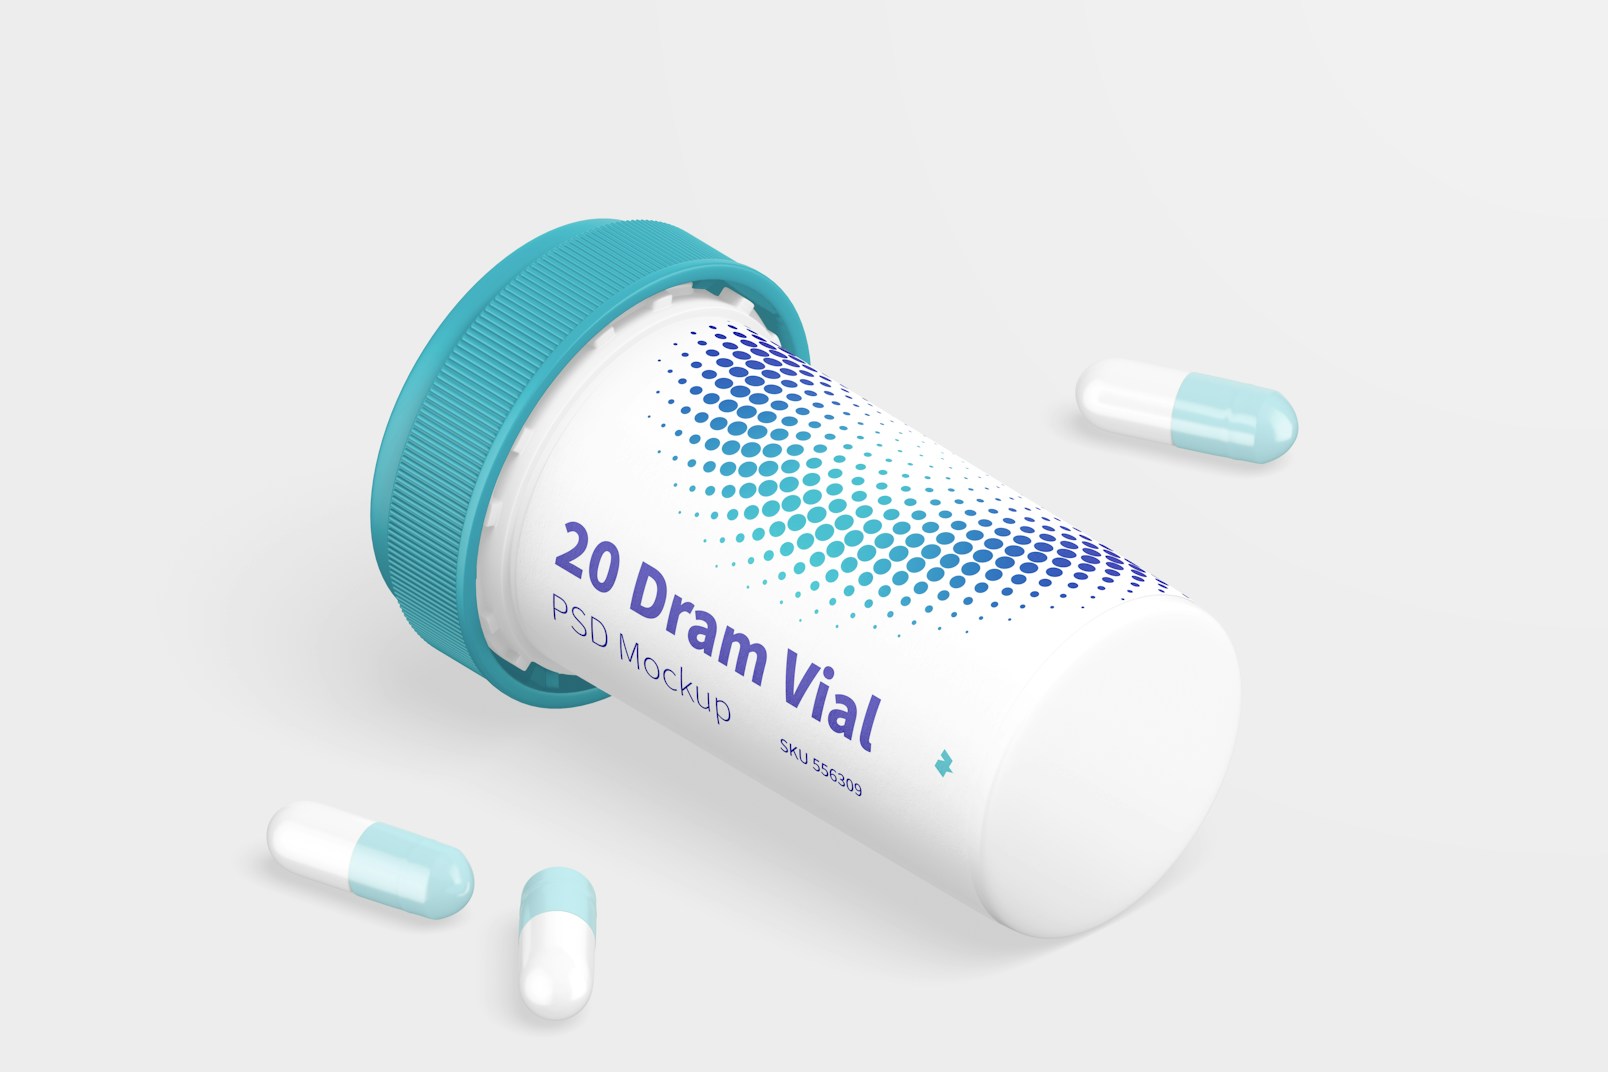 20 Dram Vial with Reversible Cap Mockup, Isometric Right View